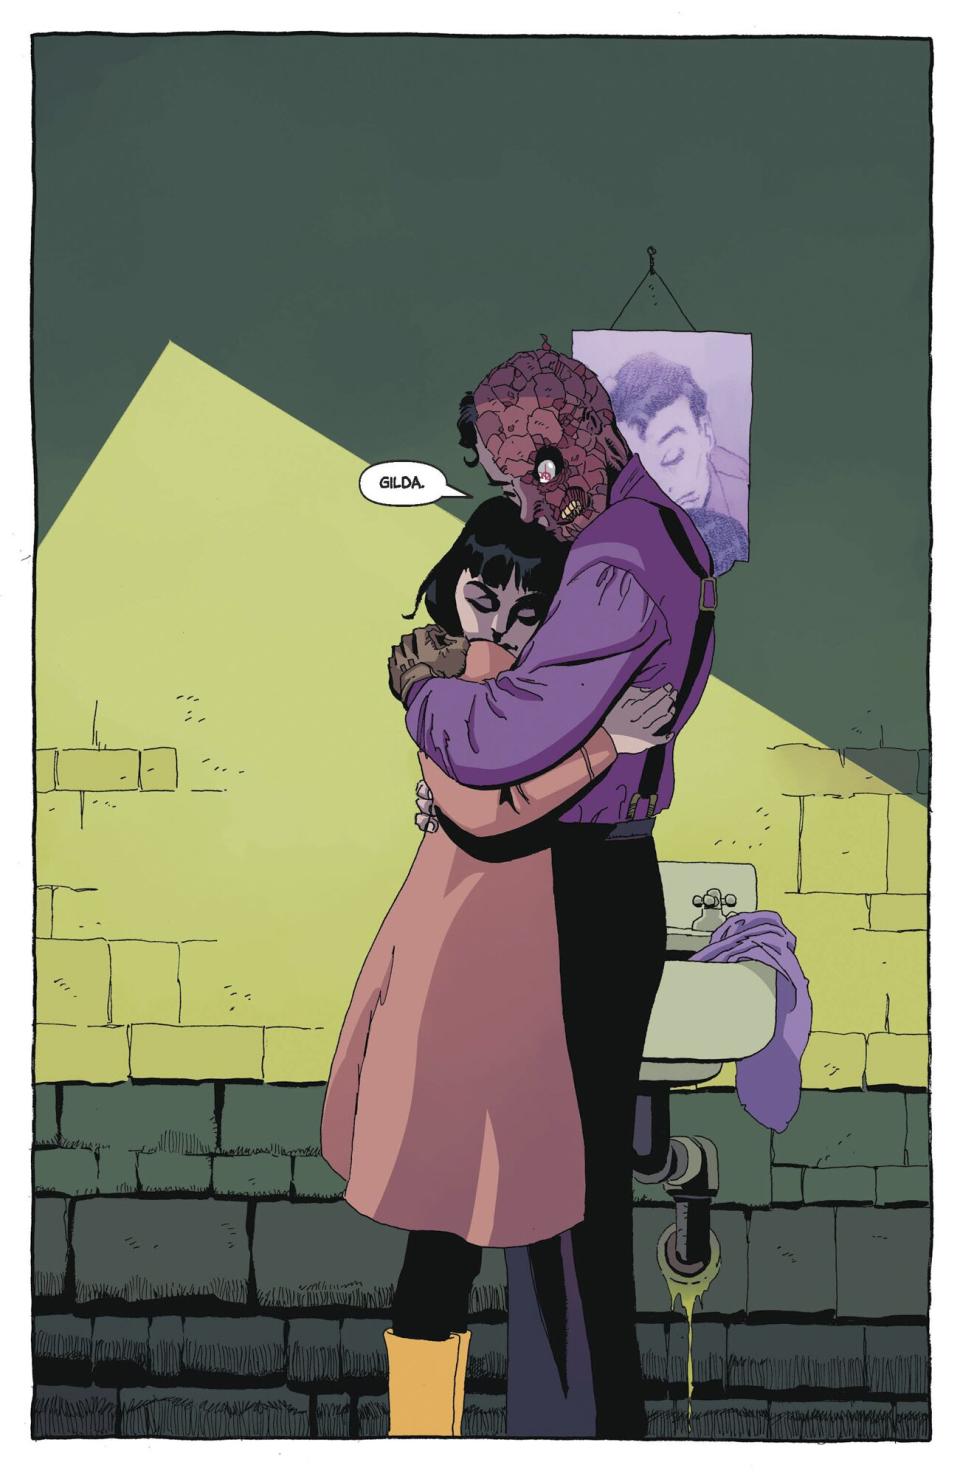 Two-Face reunites with his wife, Gilda Dent, in 'Batman: The Long Halloween Special,' by Jeph Loeb and Tim Sale